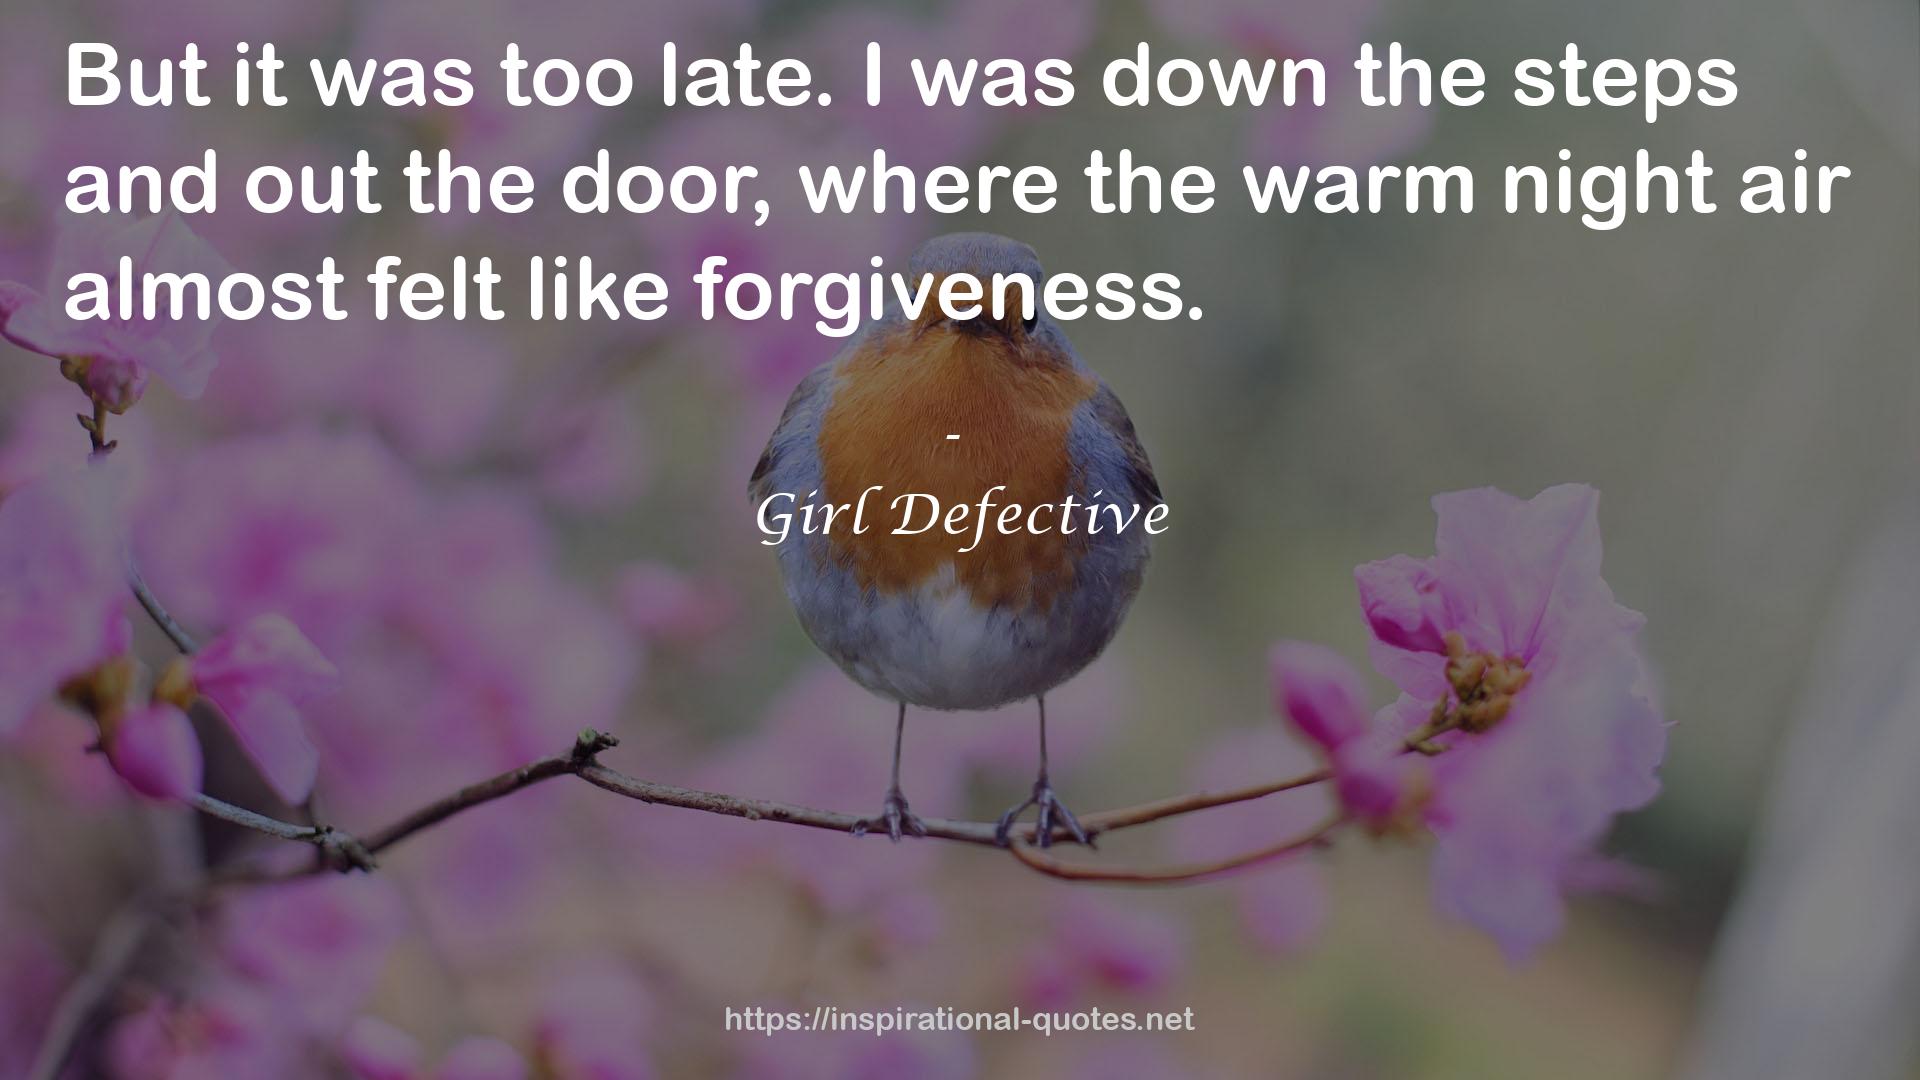 Girl Defective QUOTES